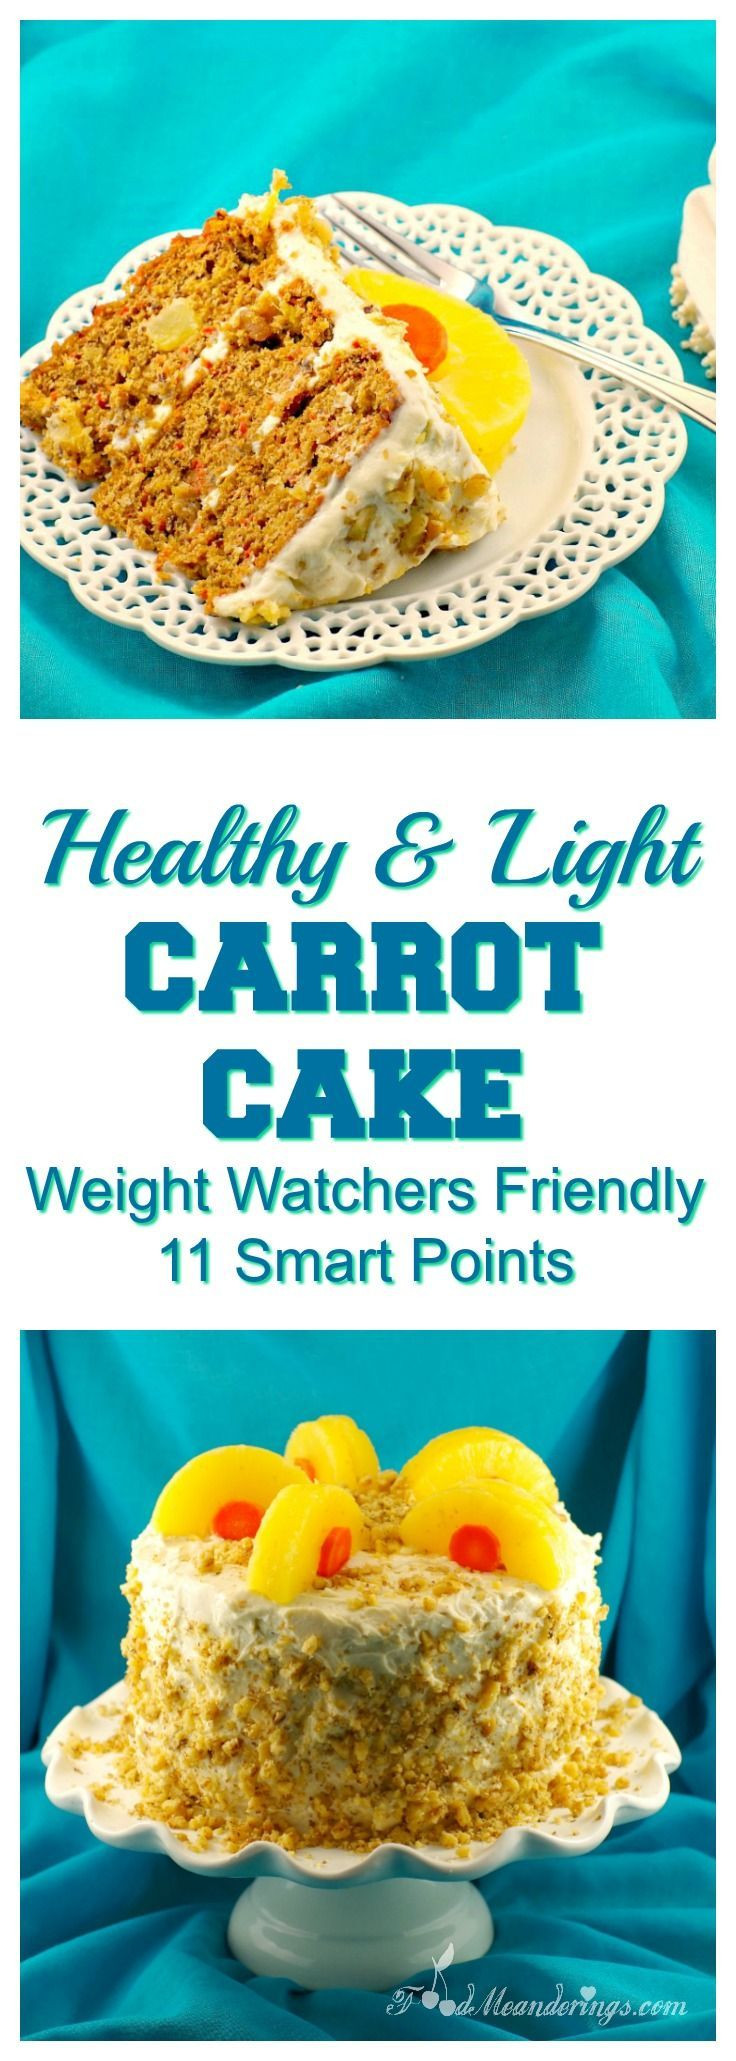 Low Fat Cake Recipes Weight Watchers
 Healthy & Light Carrot Cake Recipe